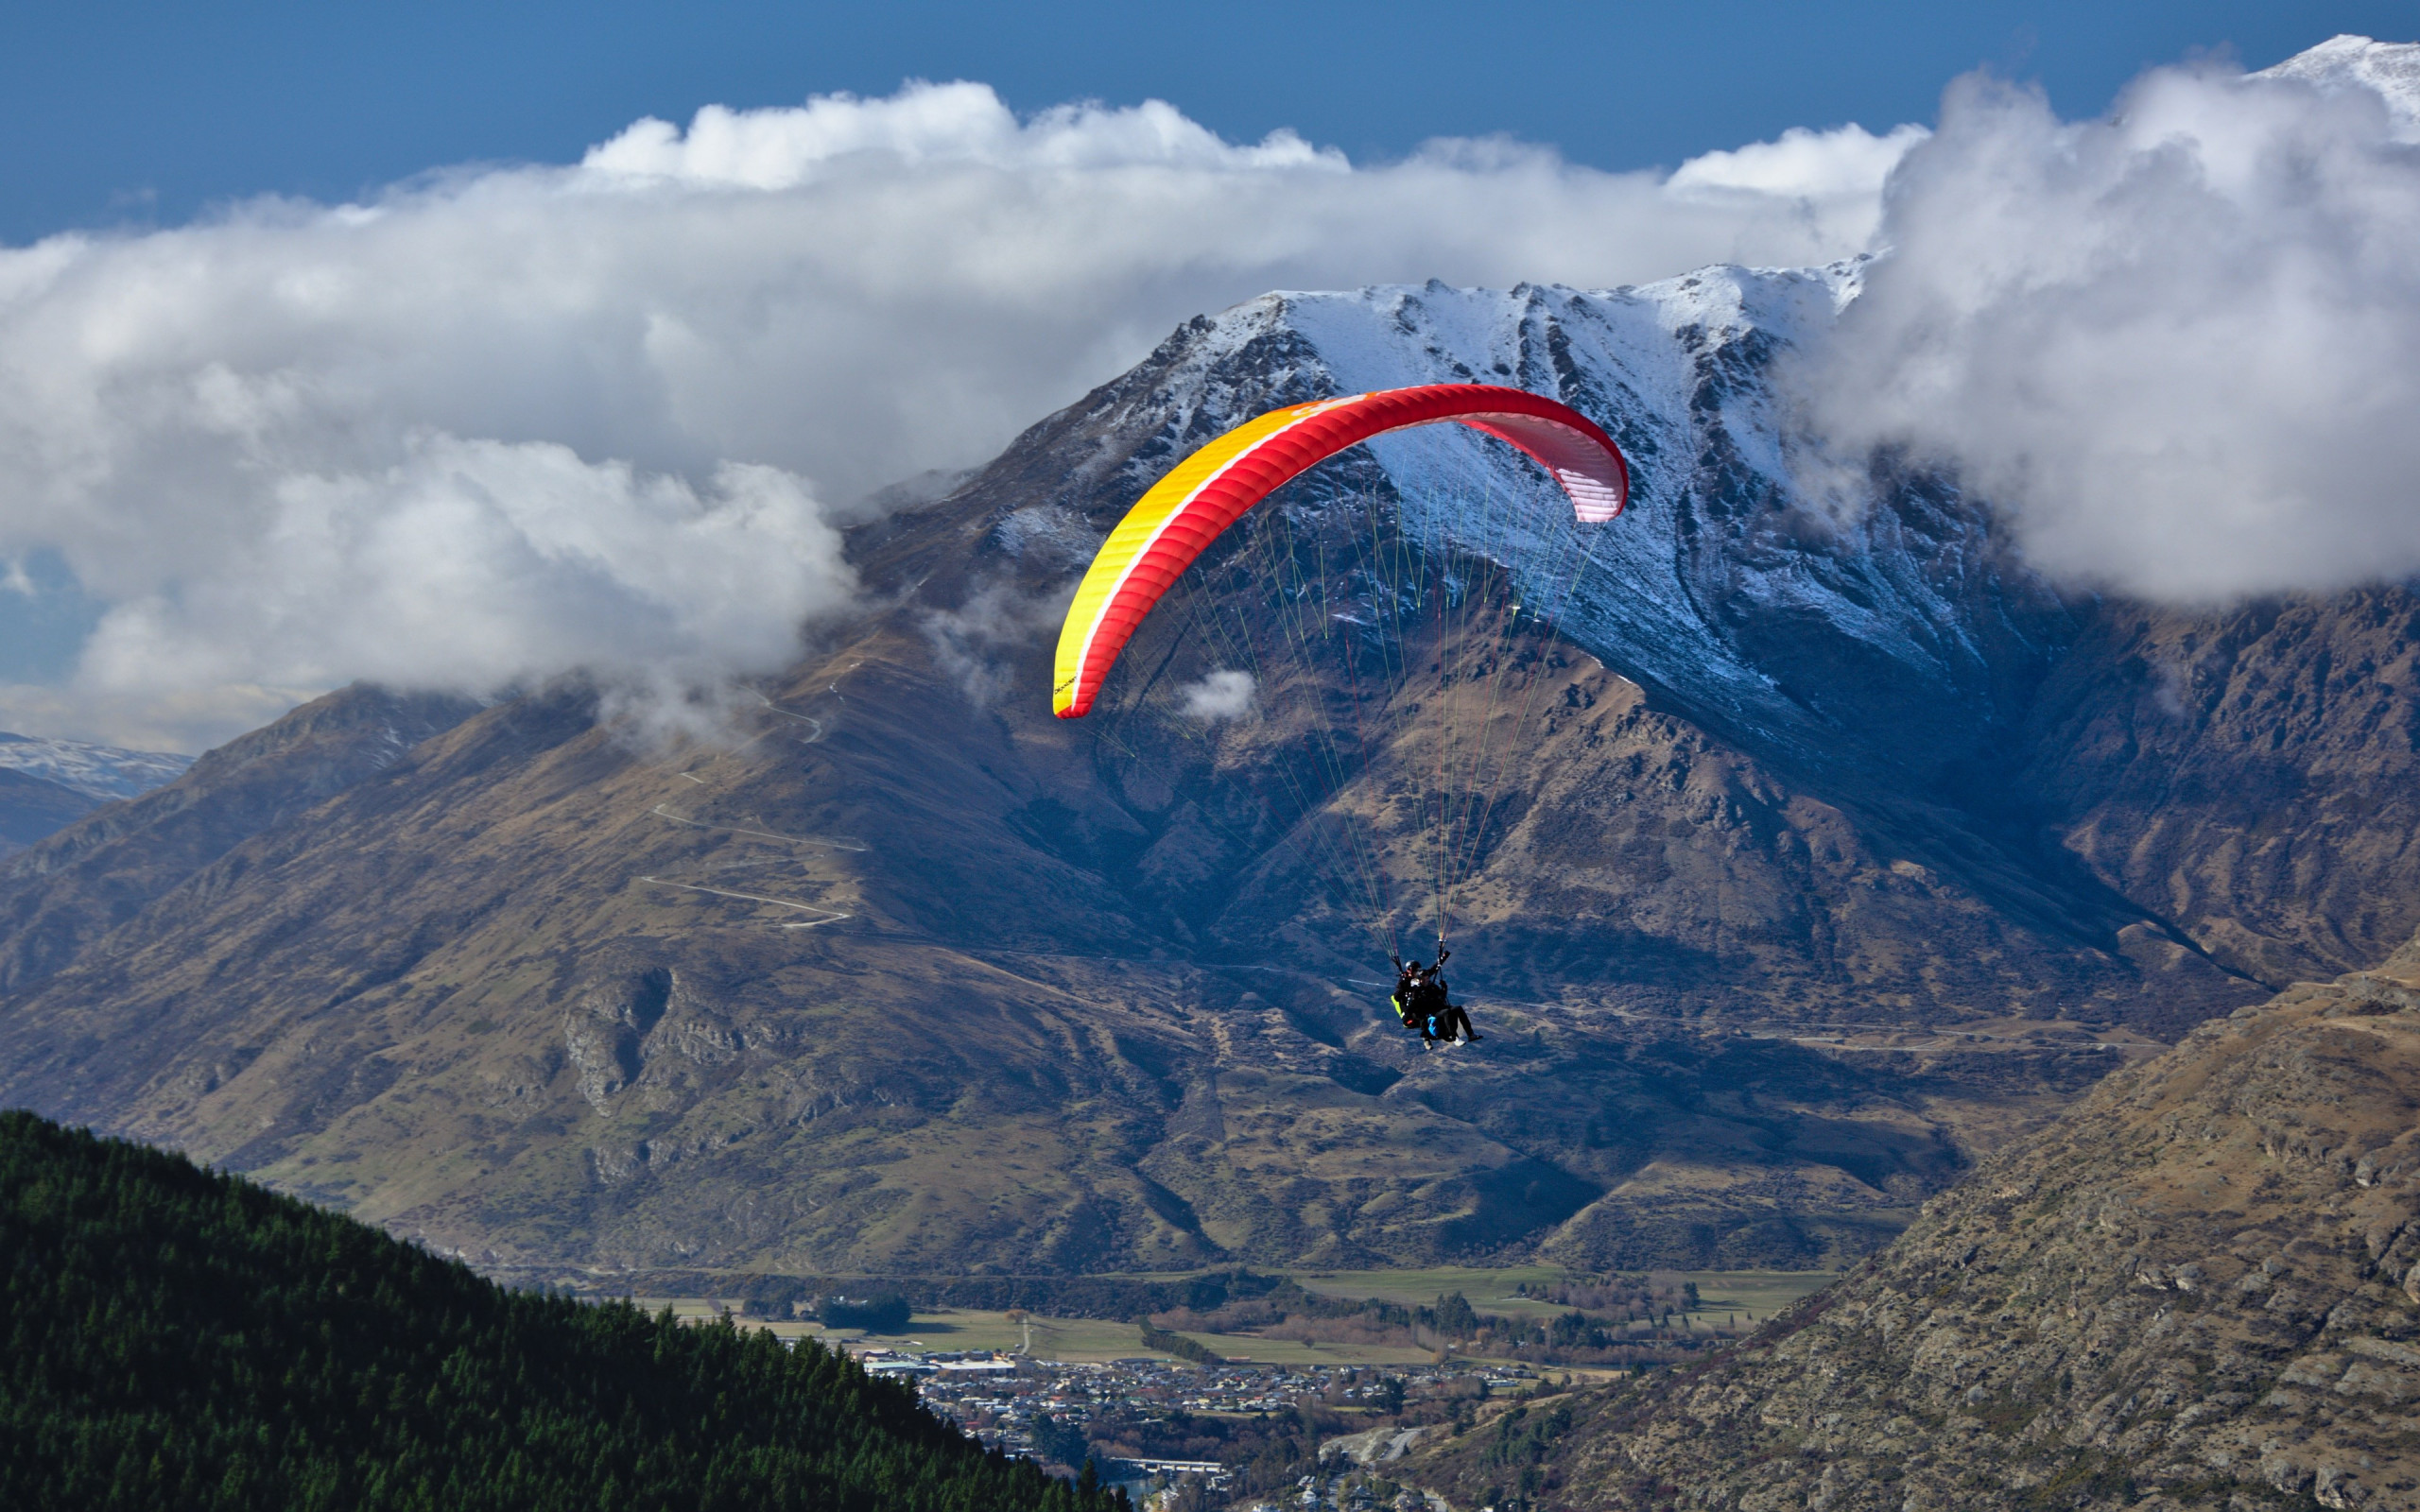 Paraglider up in the sky wallpaper 2560x1600